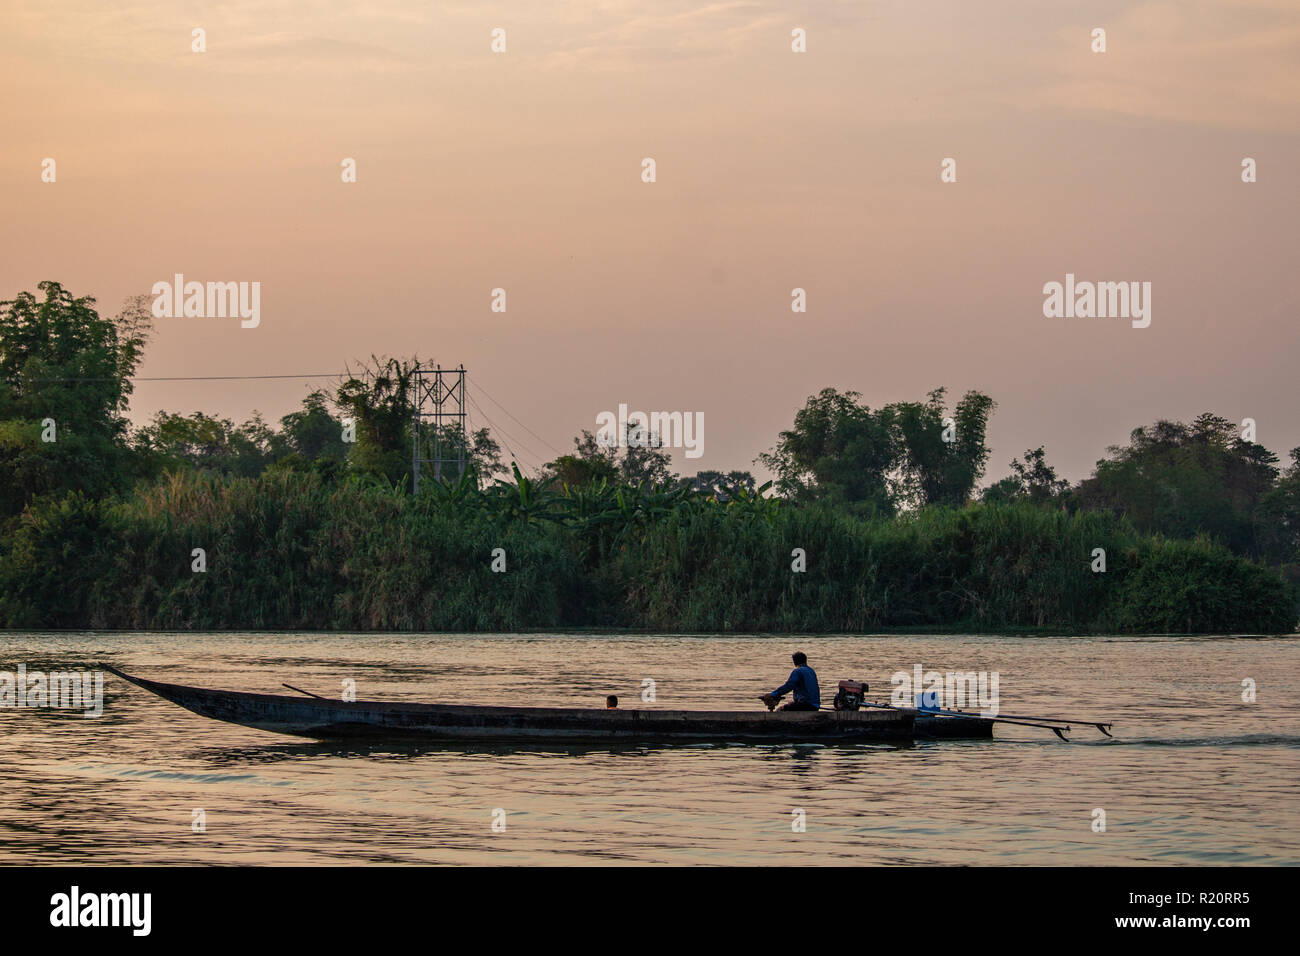 Don Det, Laos - April 22, 2018: Boat crossing the Mekong river surrounded by a green landscape at dusk Stock Photo